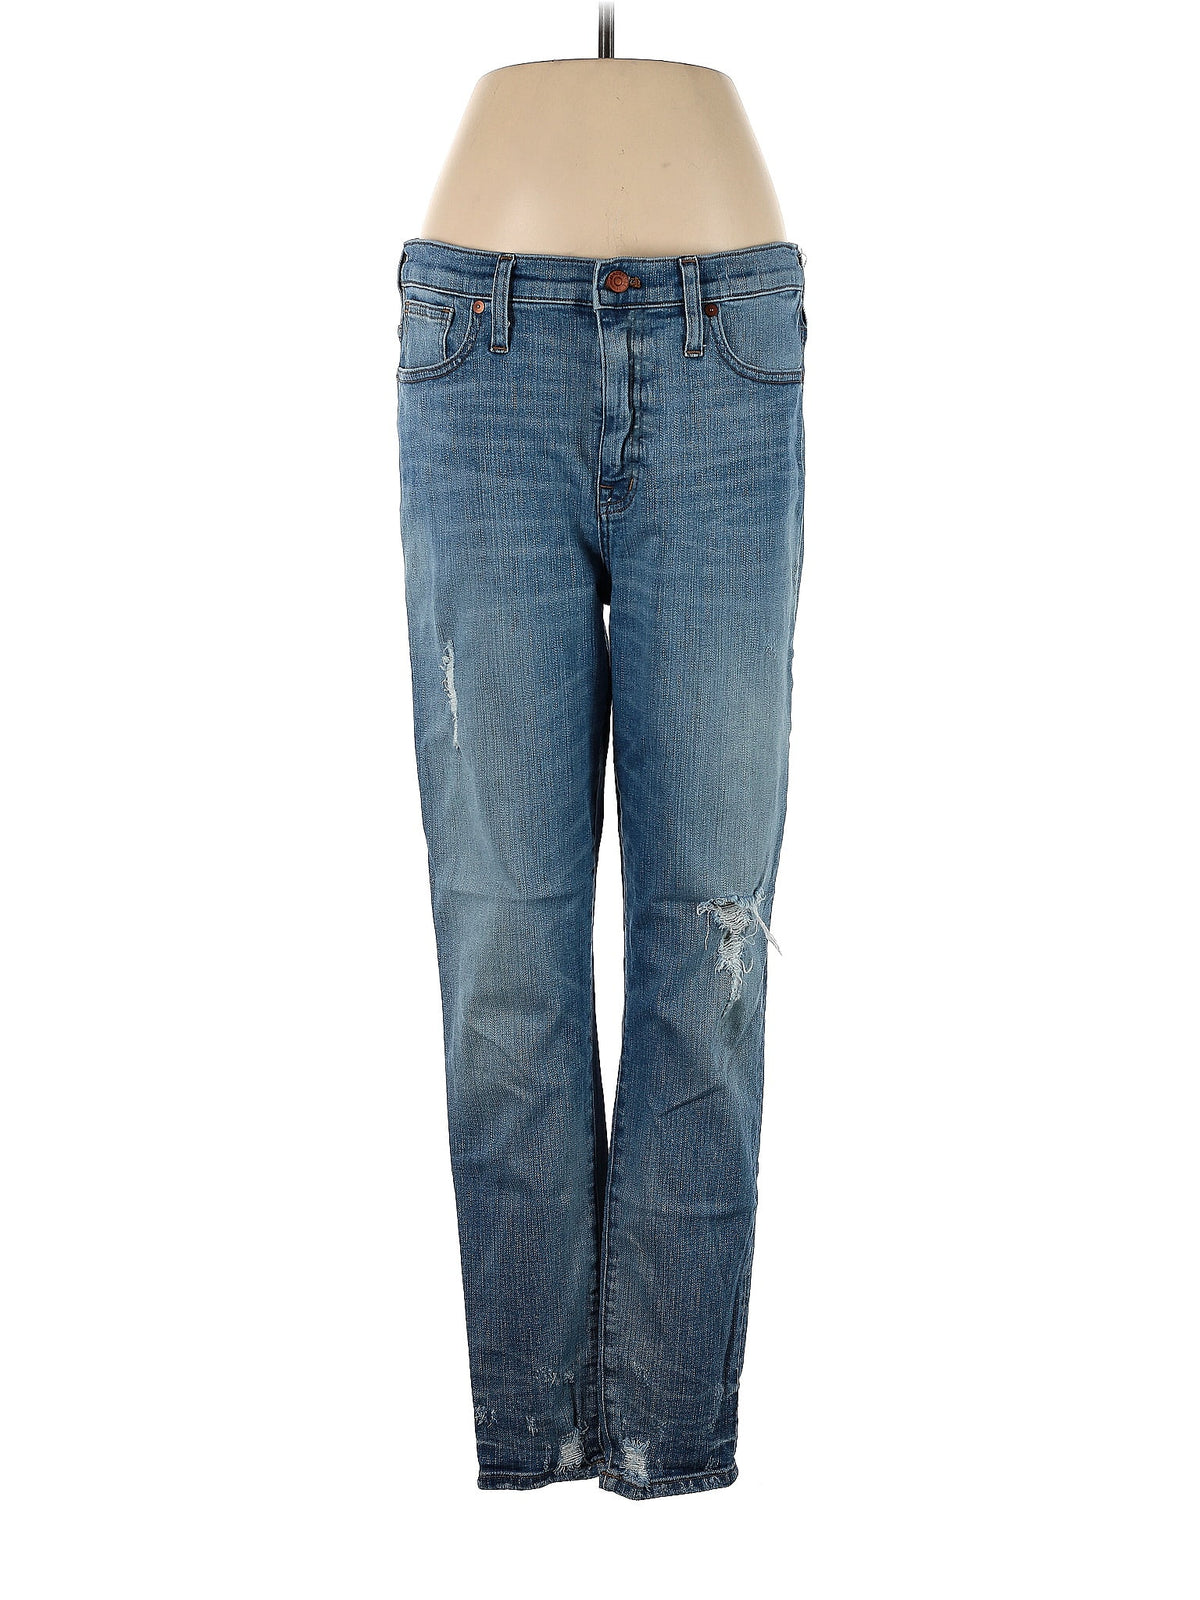 High-Rise Boyjeans Jeans in Light Wash waist size - 31